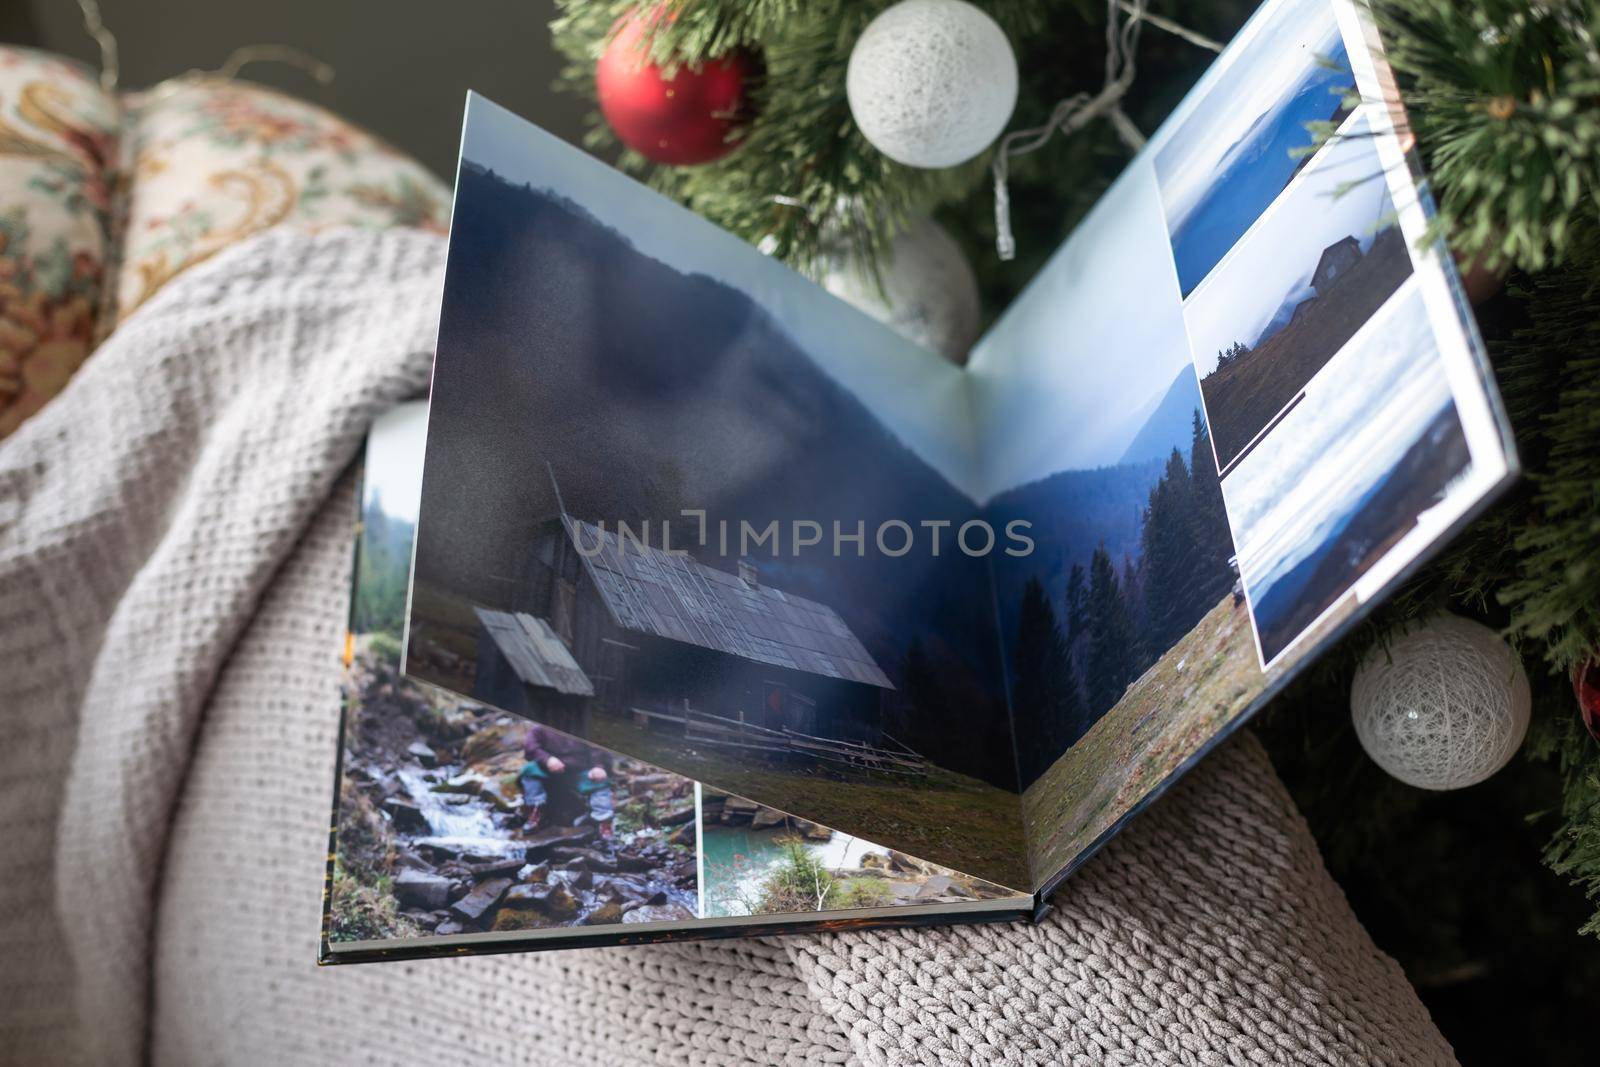 photo book about traveling near the Christmas tree.